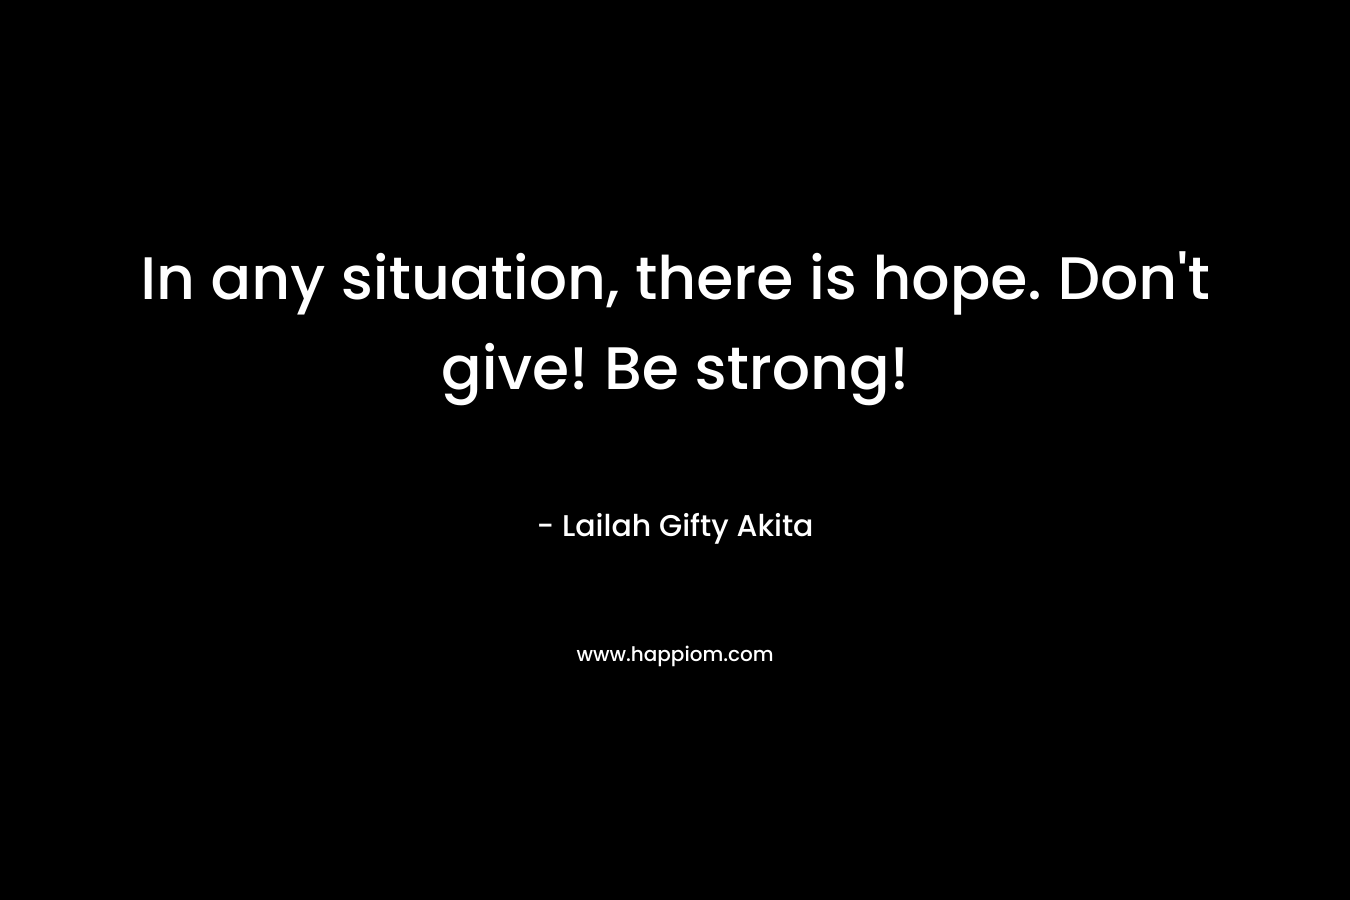 In any situation, there is hope. Don't give! Be strong!